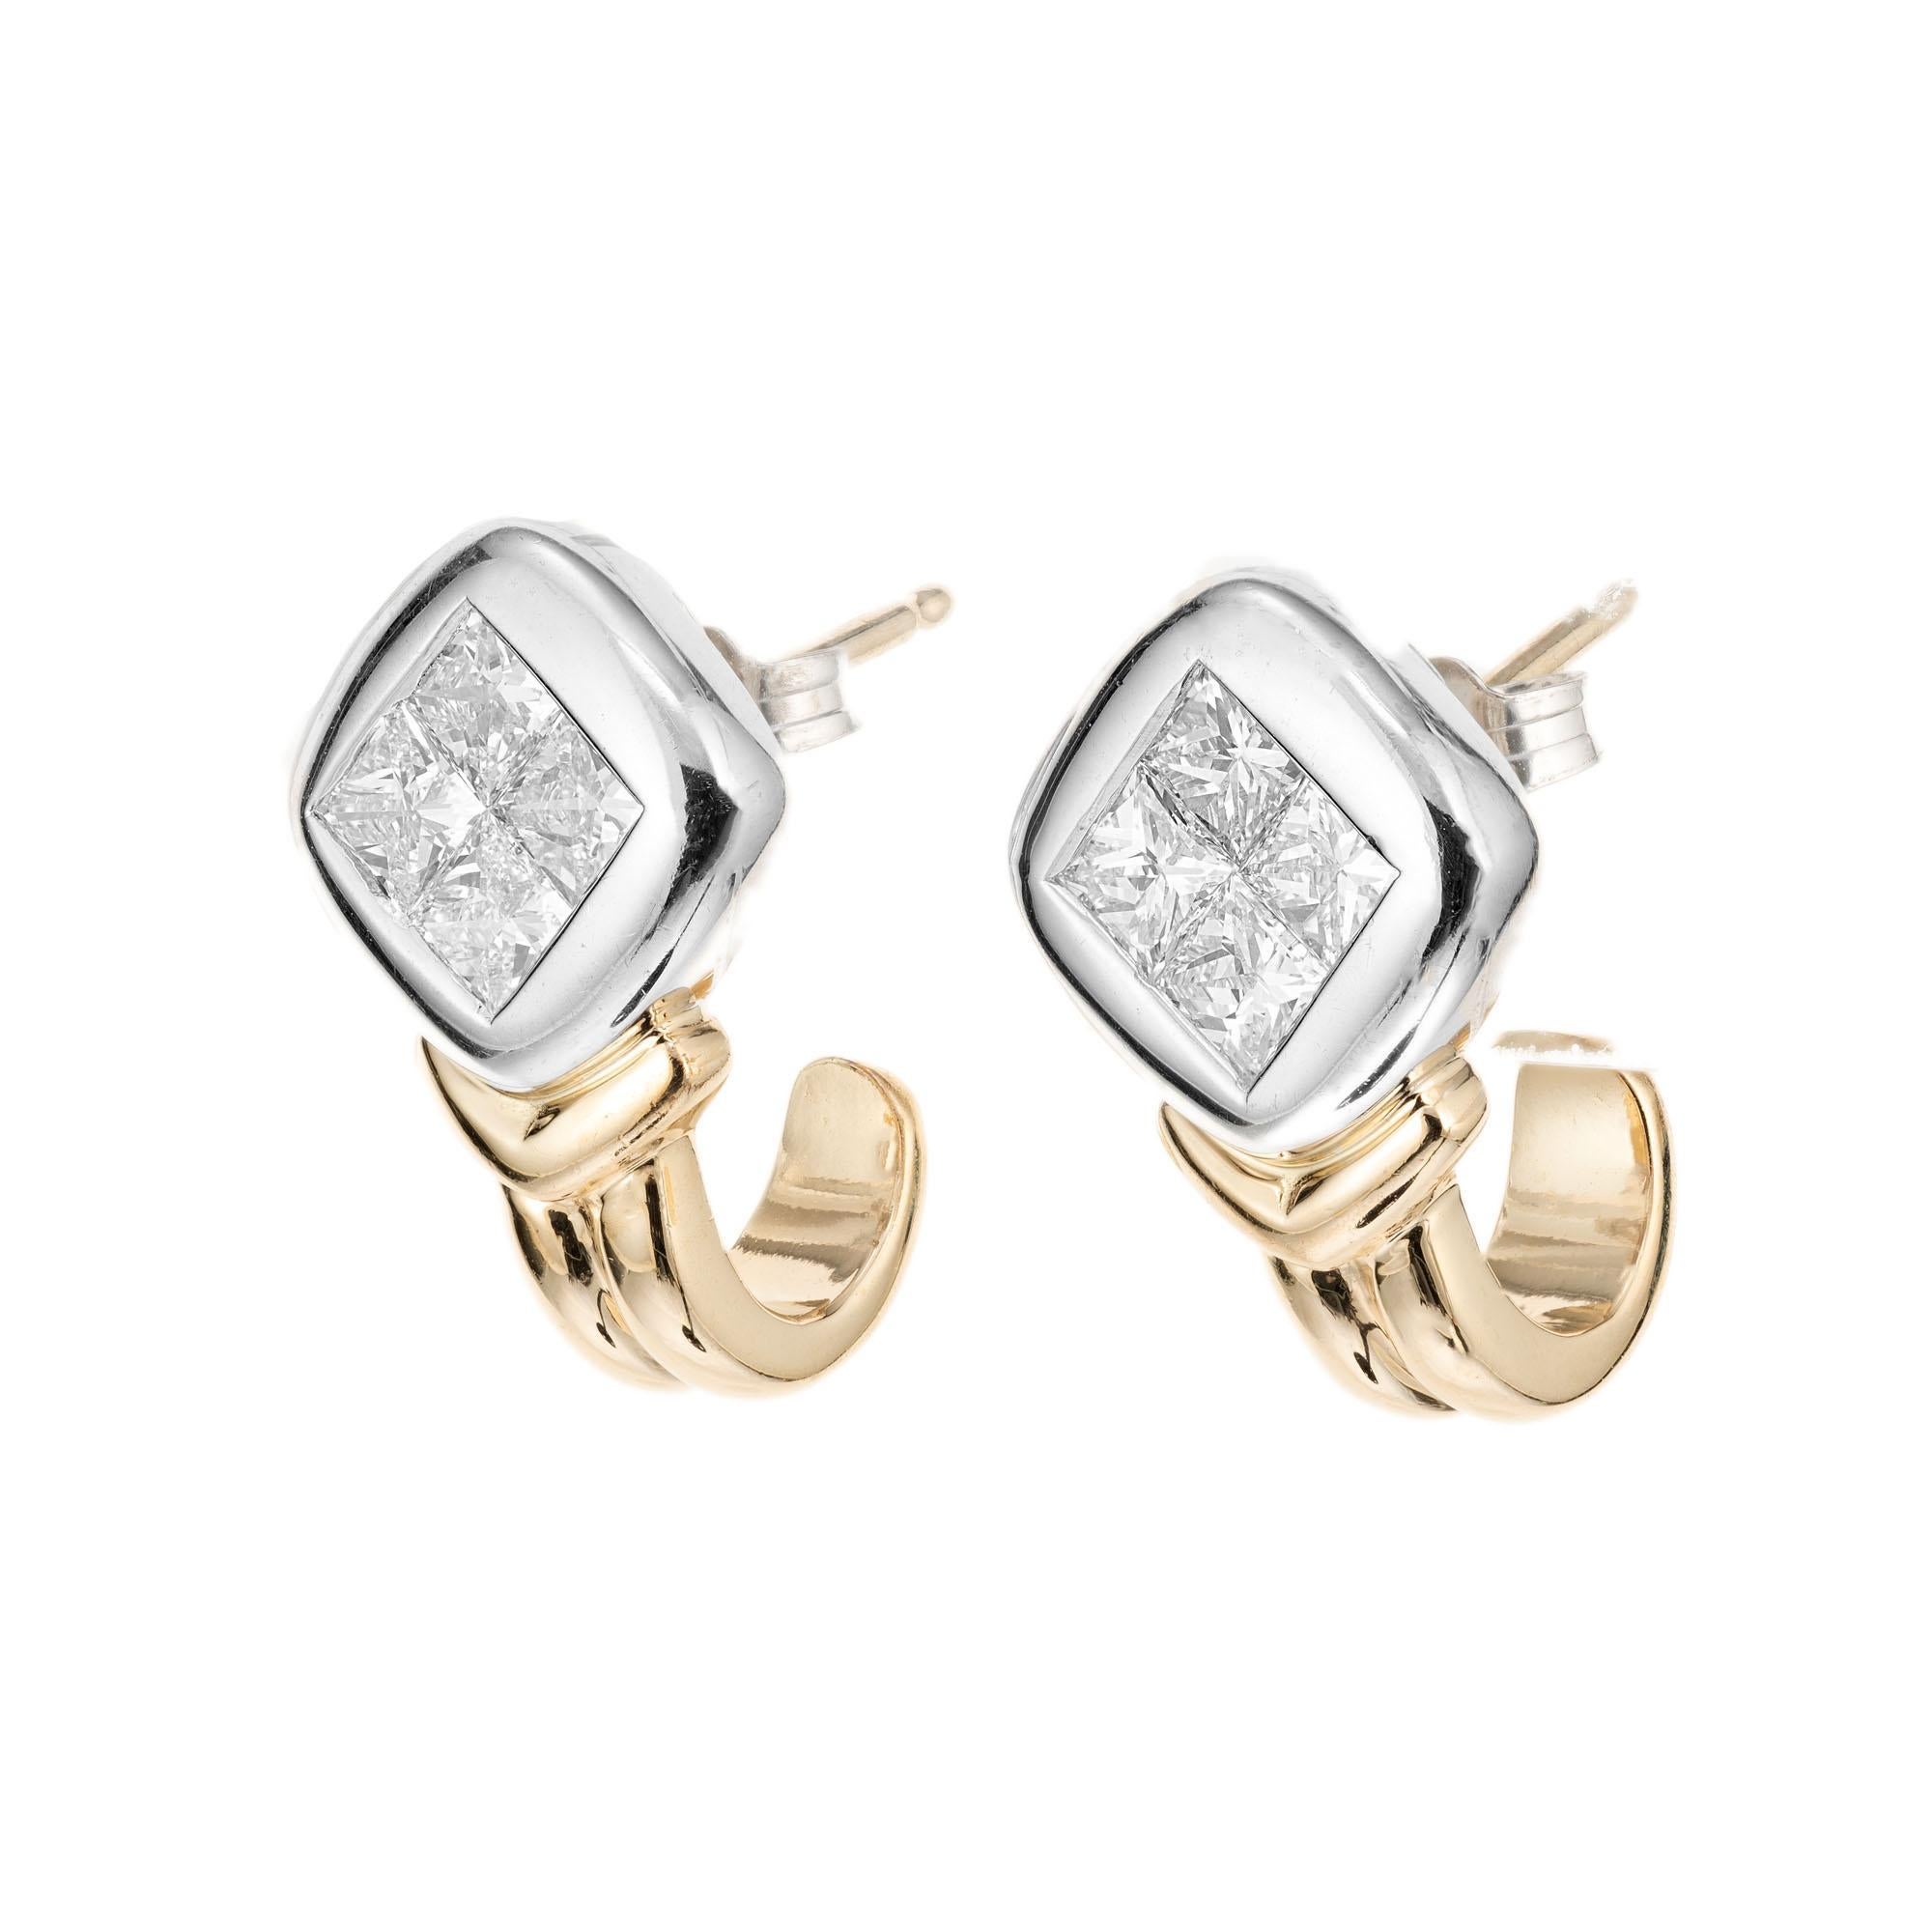 8 princess cut diamond earrings. 14k white tops with 14k yellow bottoms. 

8 princess cut diamonds, G-H VS approx. 1.10cts
14k white gold 
14k yellow gold 
5.0 grams 
Top to bottom: 16.6mm or 5/8 Inch
Width: 10.0mm or 3/8 Inch
Depth or thickness: